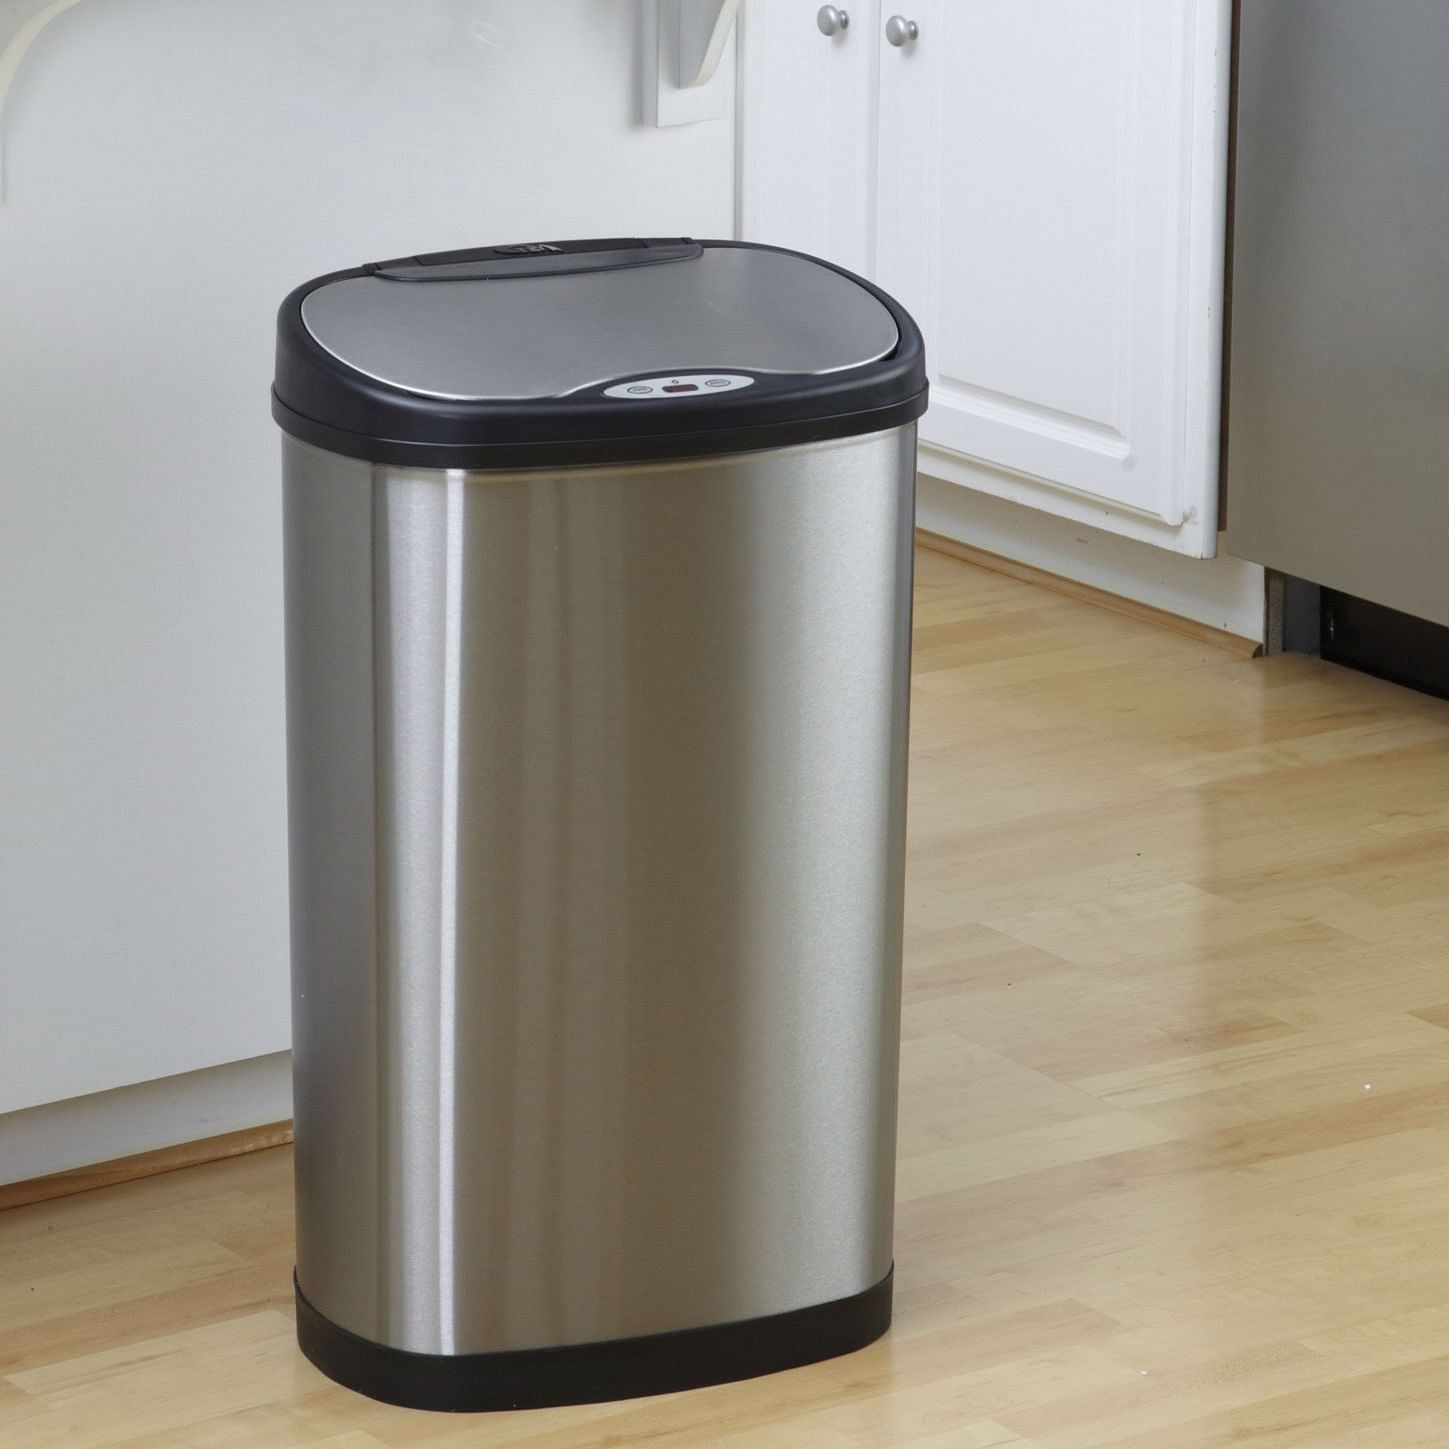 Stainless Steel 13 Gallon Touchless Kitchen Trash